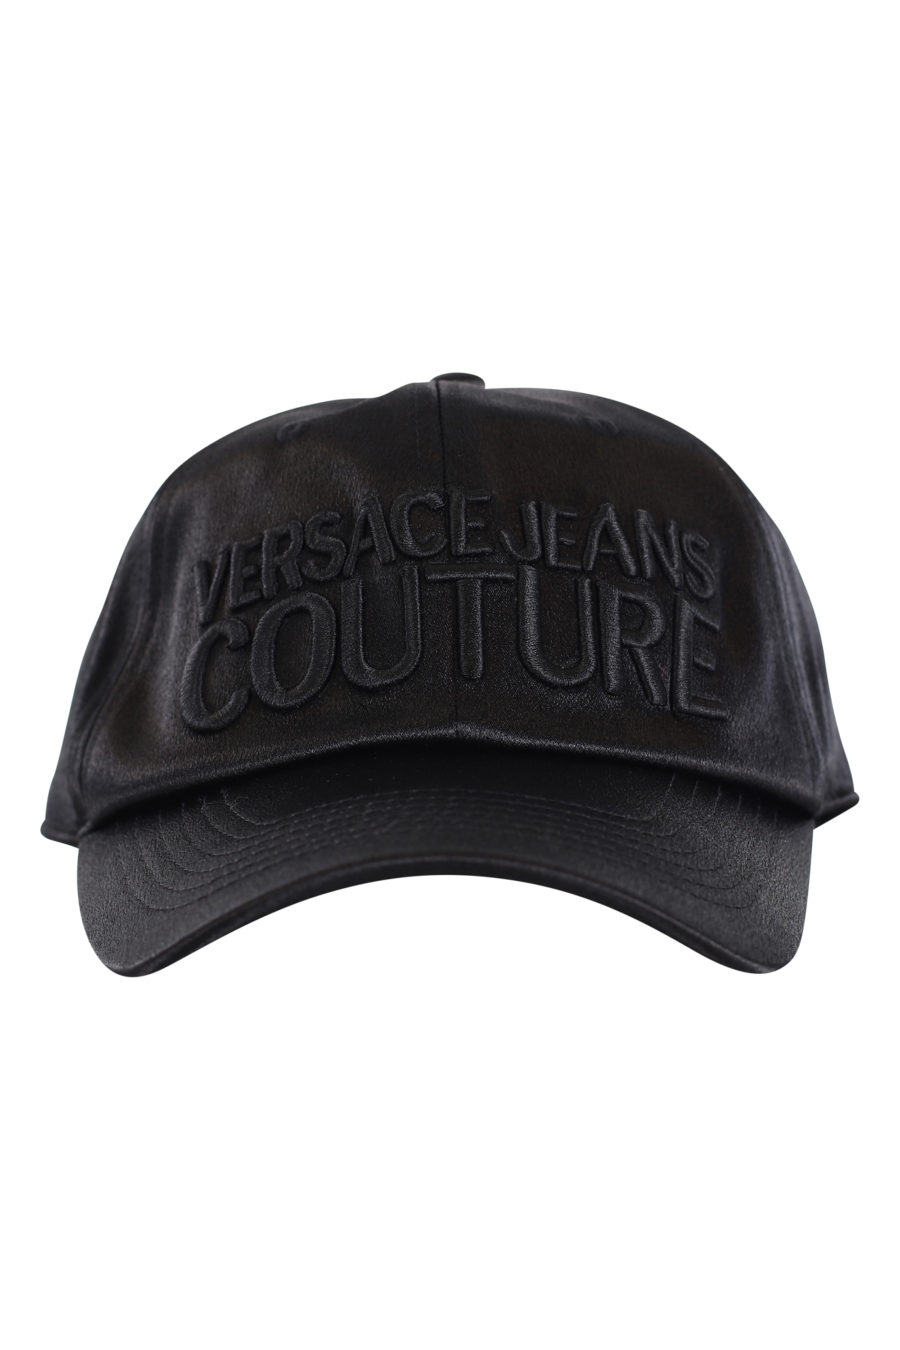 Black satin cap with black embroidered logo - IMG 0154